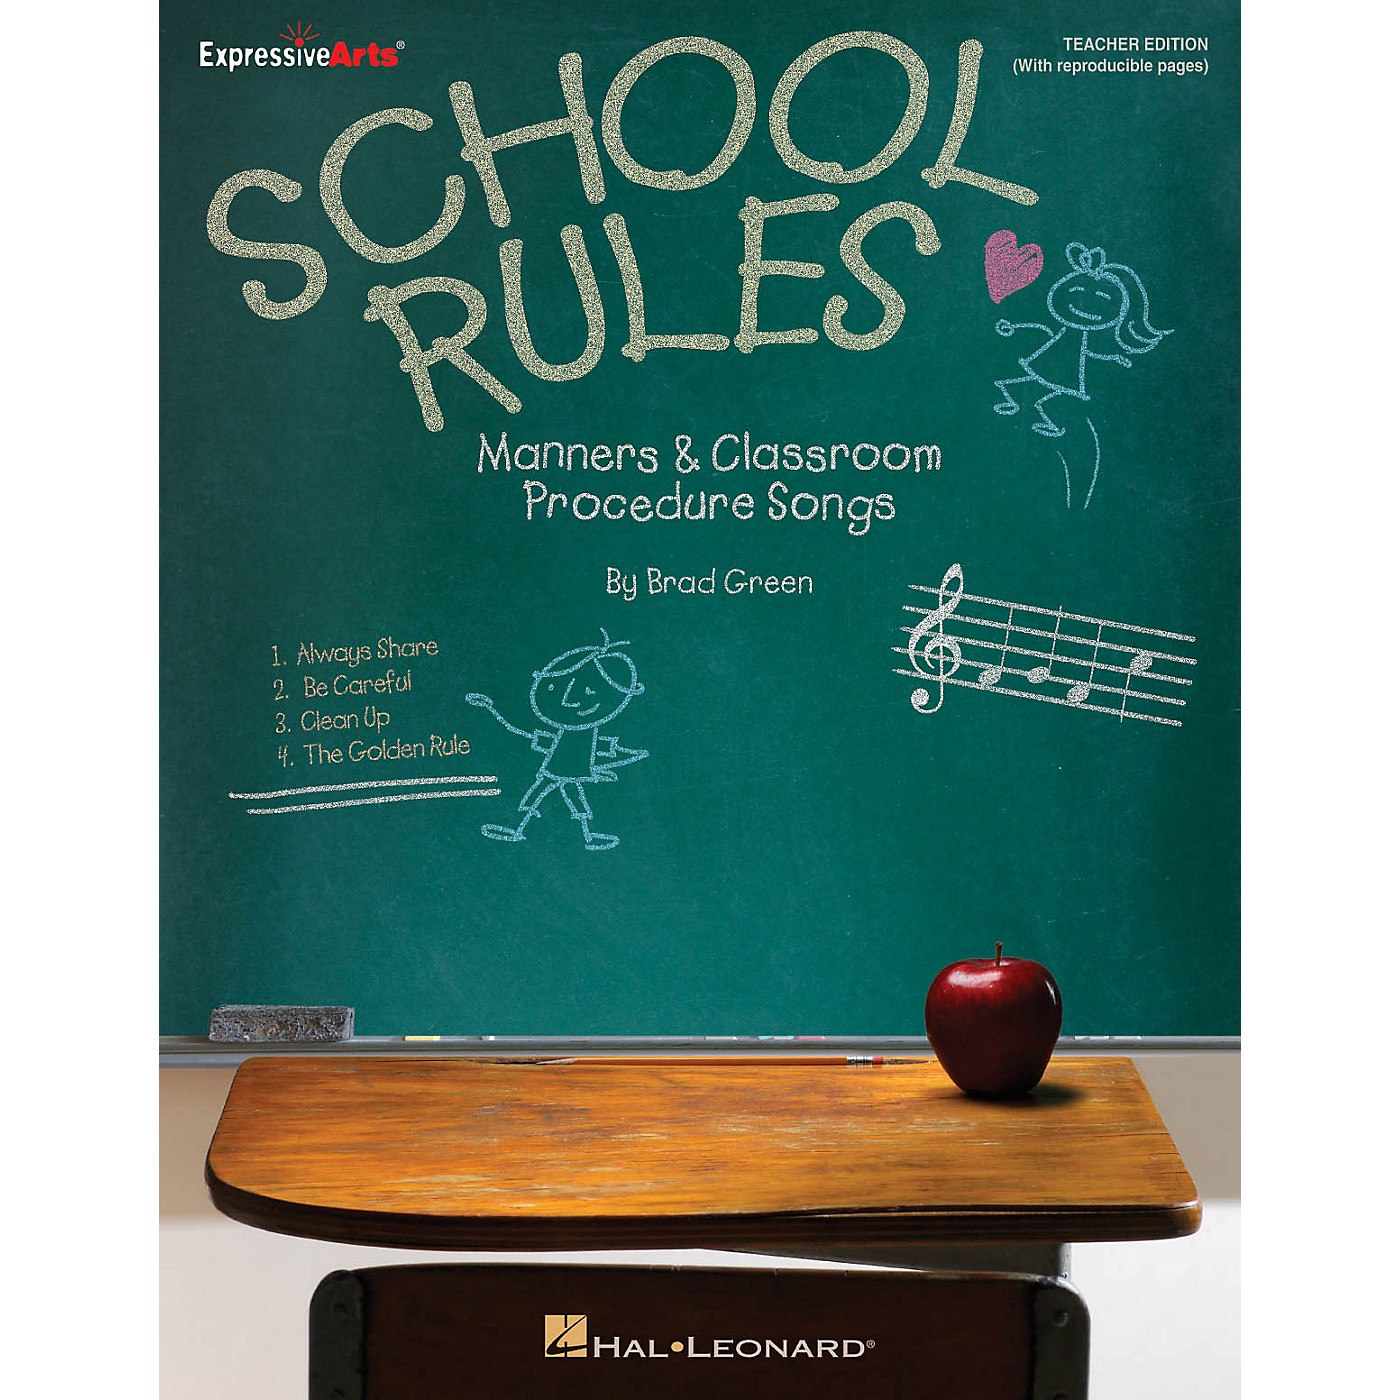 Hal Leonard School Rules (Manners and Classroom Procedure Songs) Performance/Accompaniment CD Composed by Brad Green thumbnail